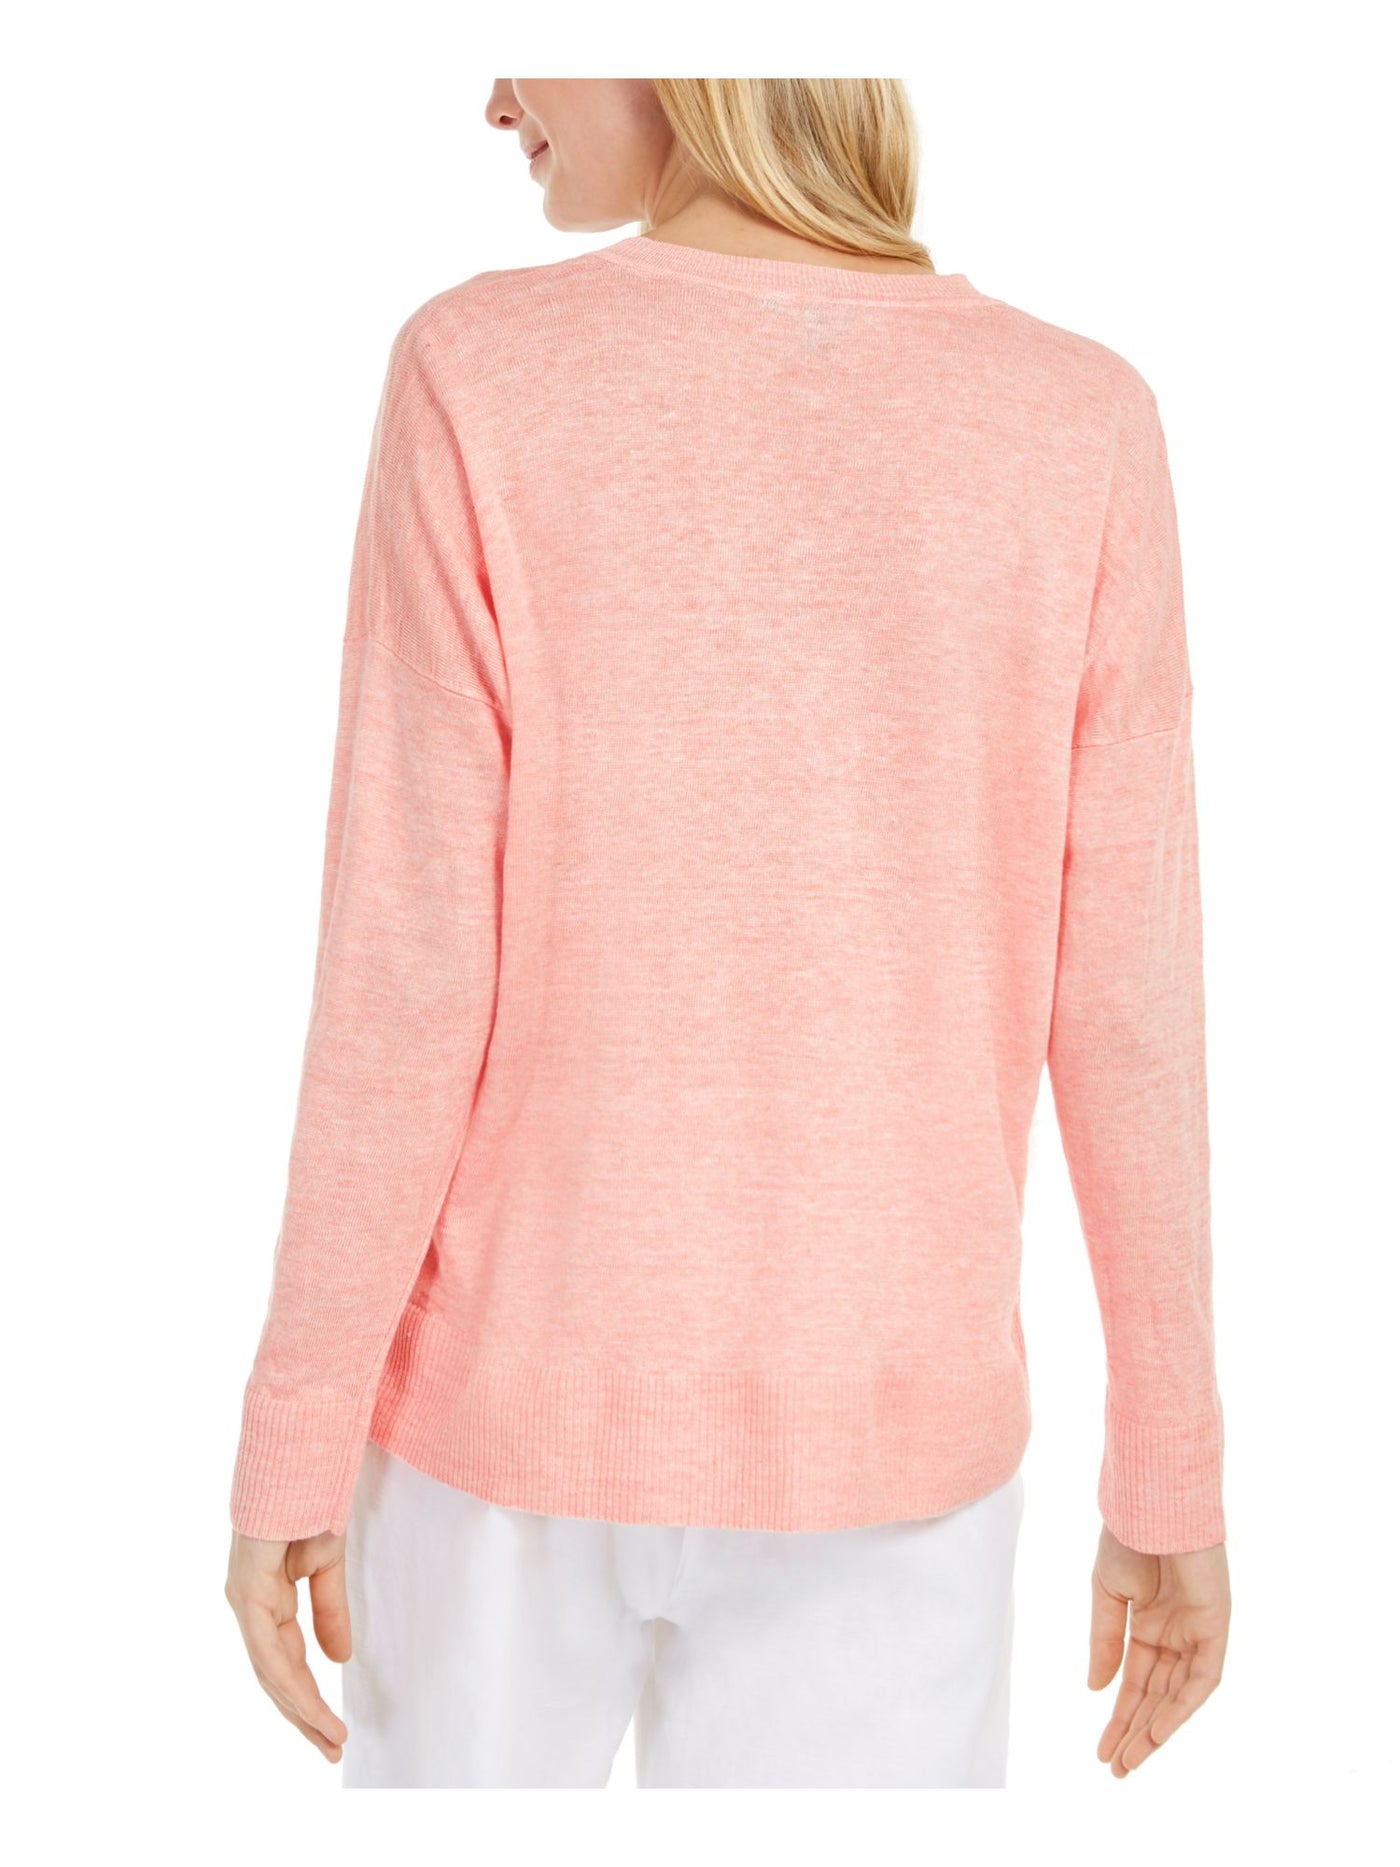 EILEEN FISHER Womens Coral Long Sleeve V Neck Sweater M